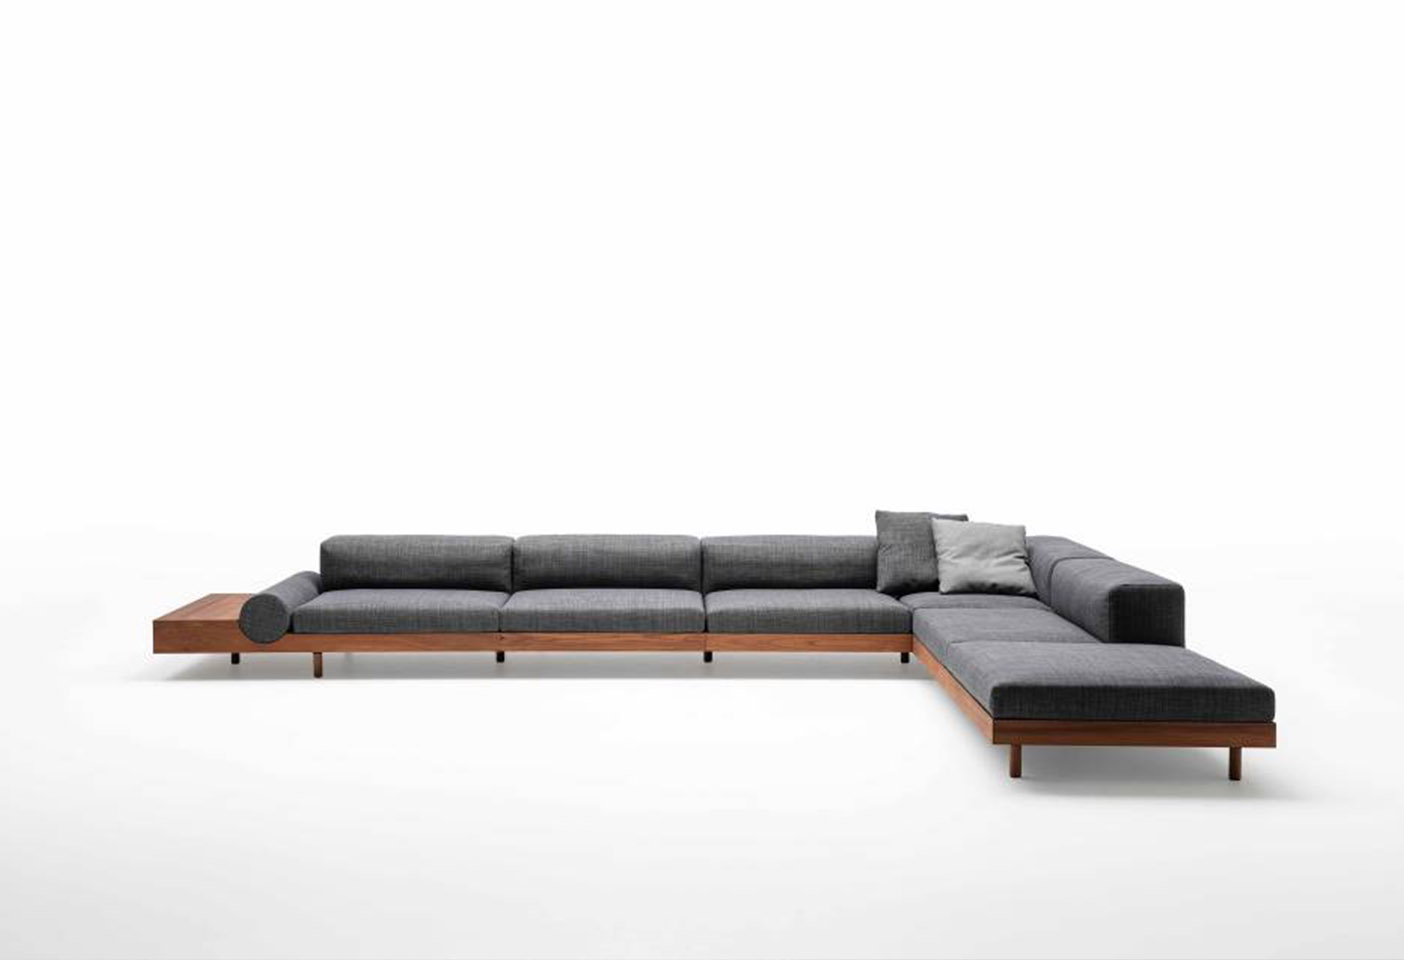 The Kasbar sofa system designed by David Lopez Quinococes for Living Divani in 2021. Photo c/o Living Divani. 